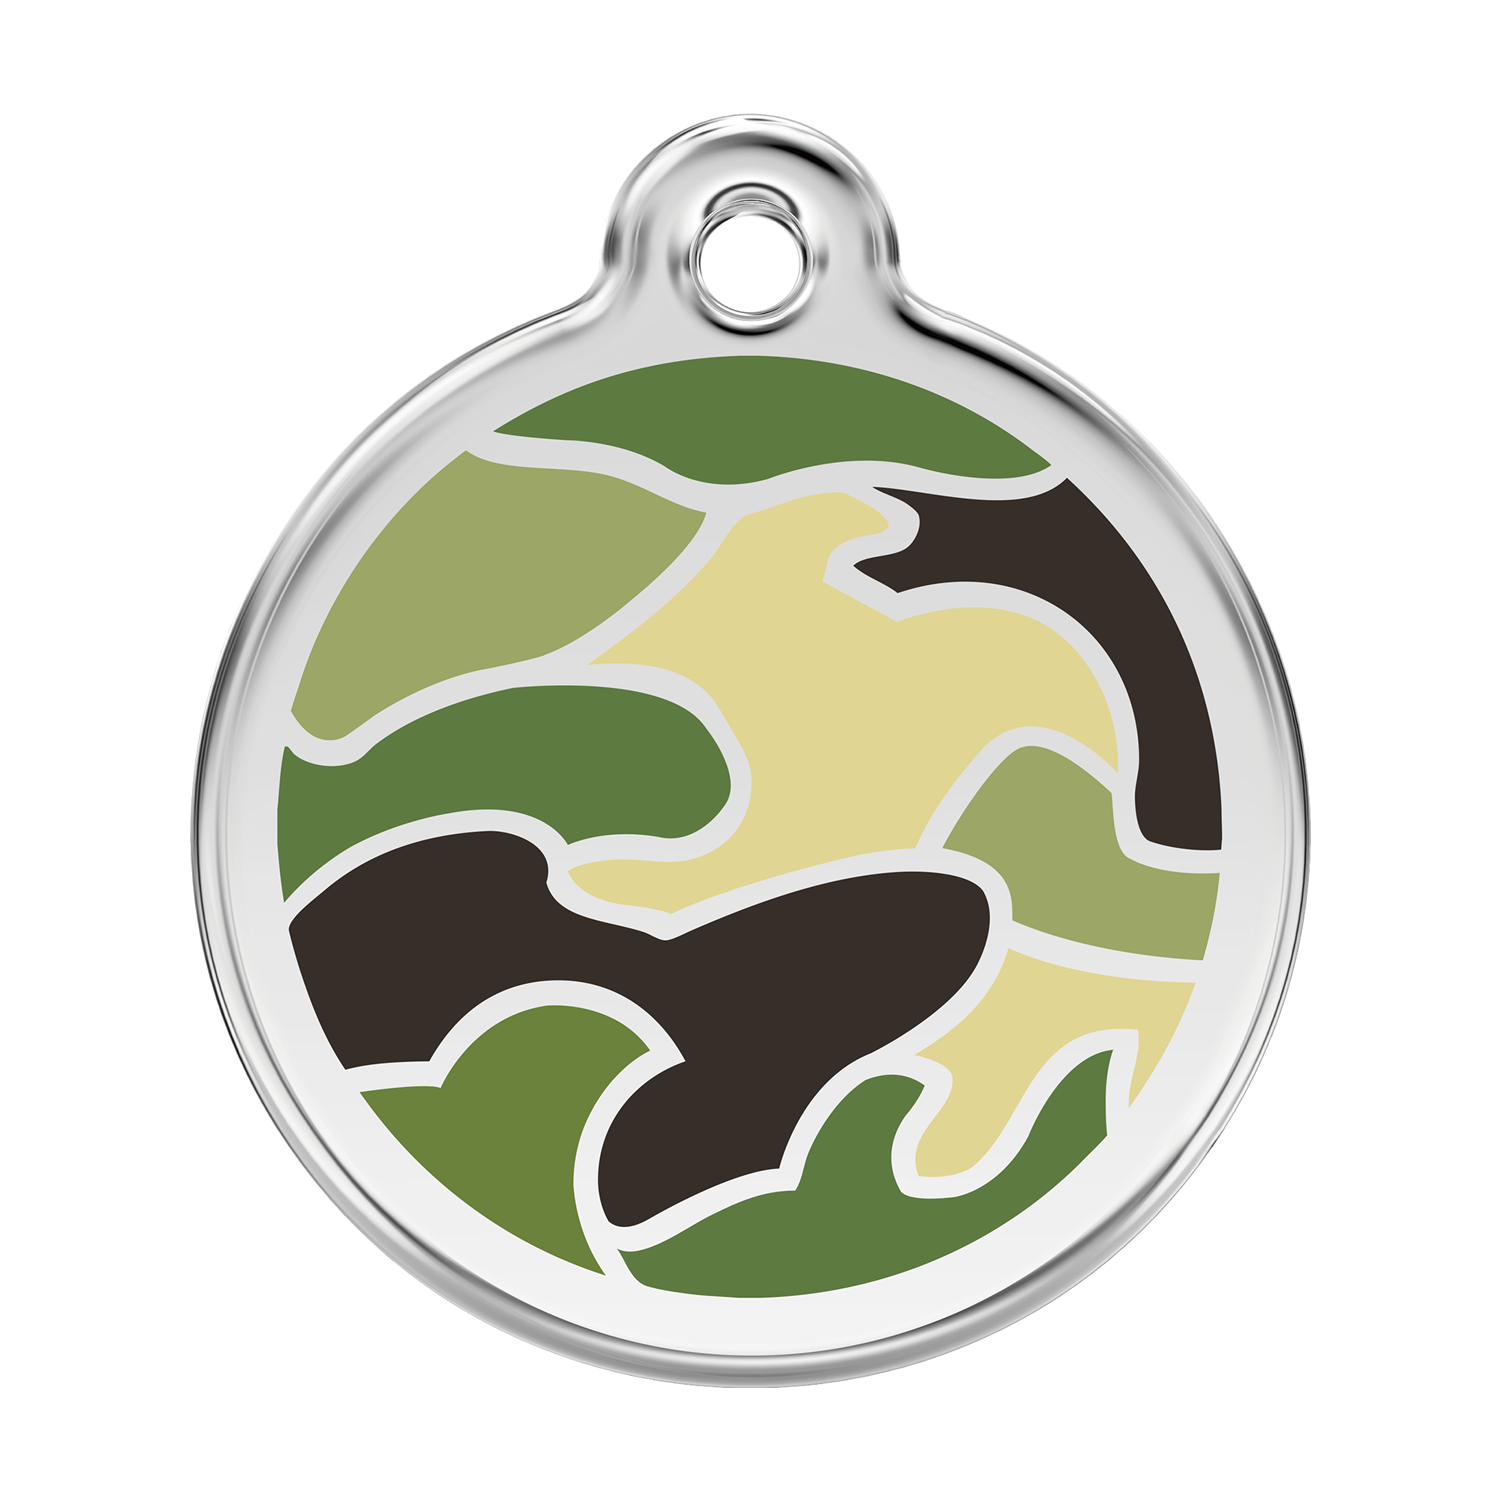 Red Dingo Stainless Steel & Enamel Green Camouflage Dog ID Tag